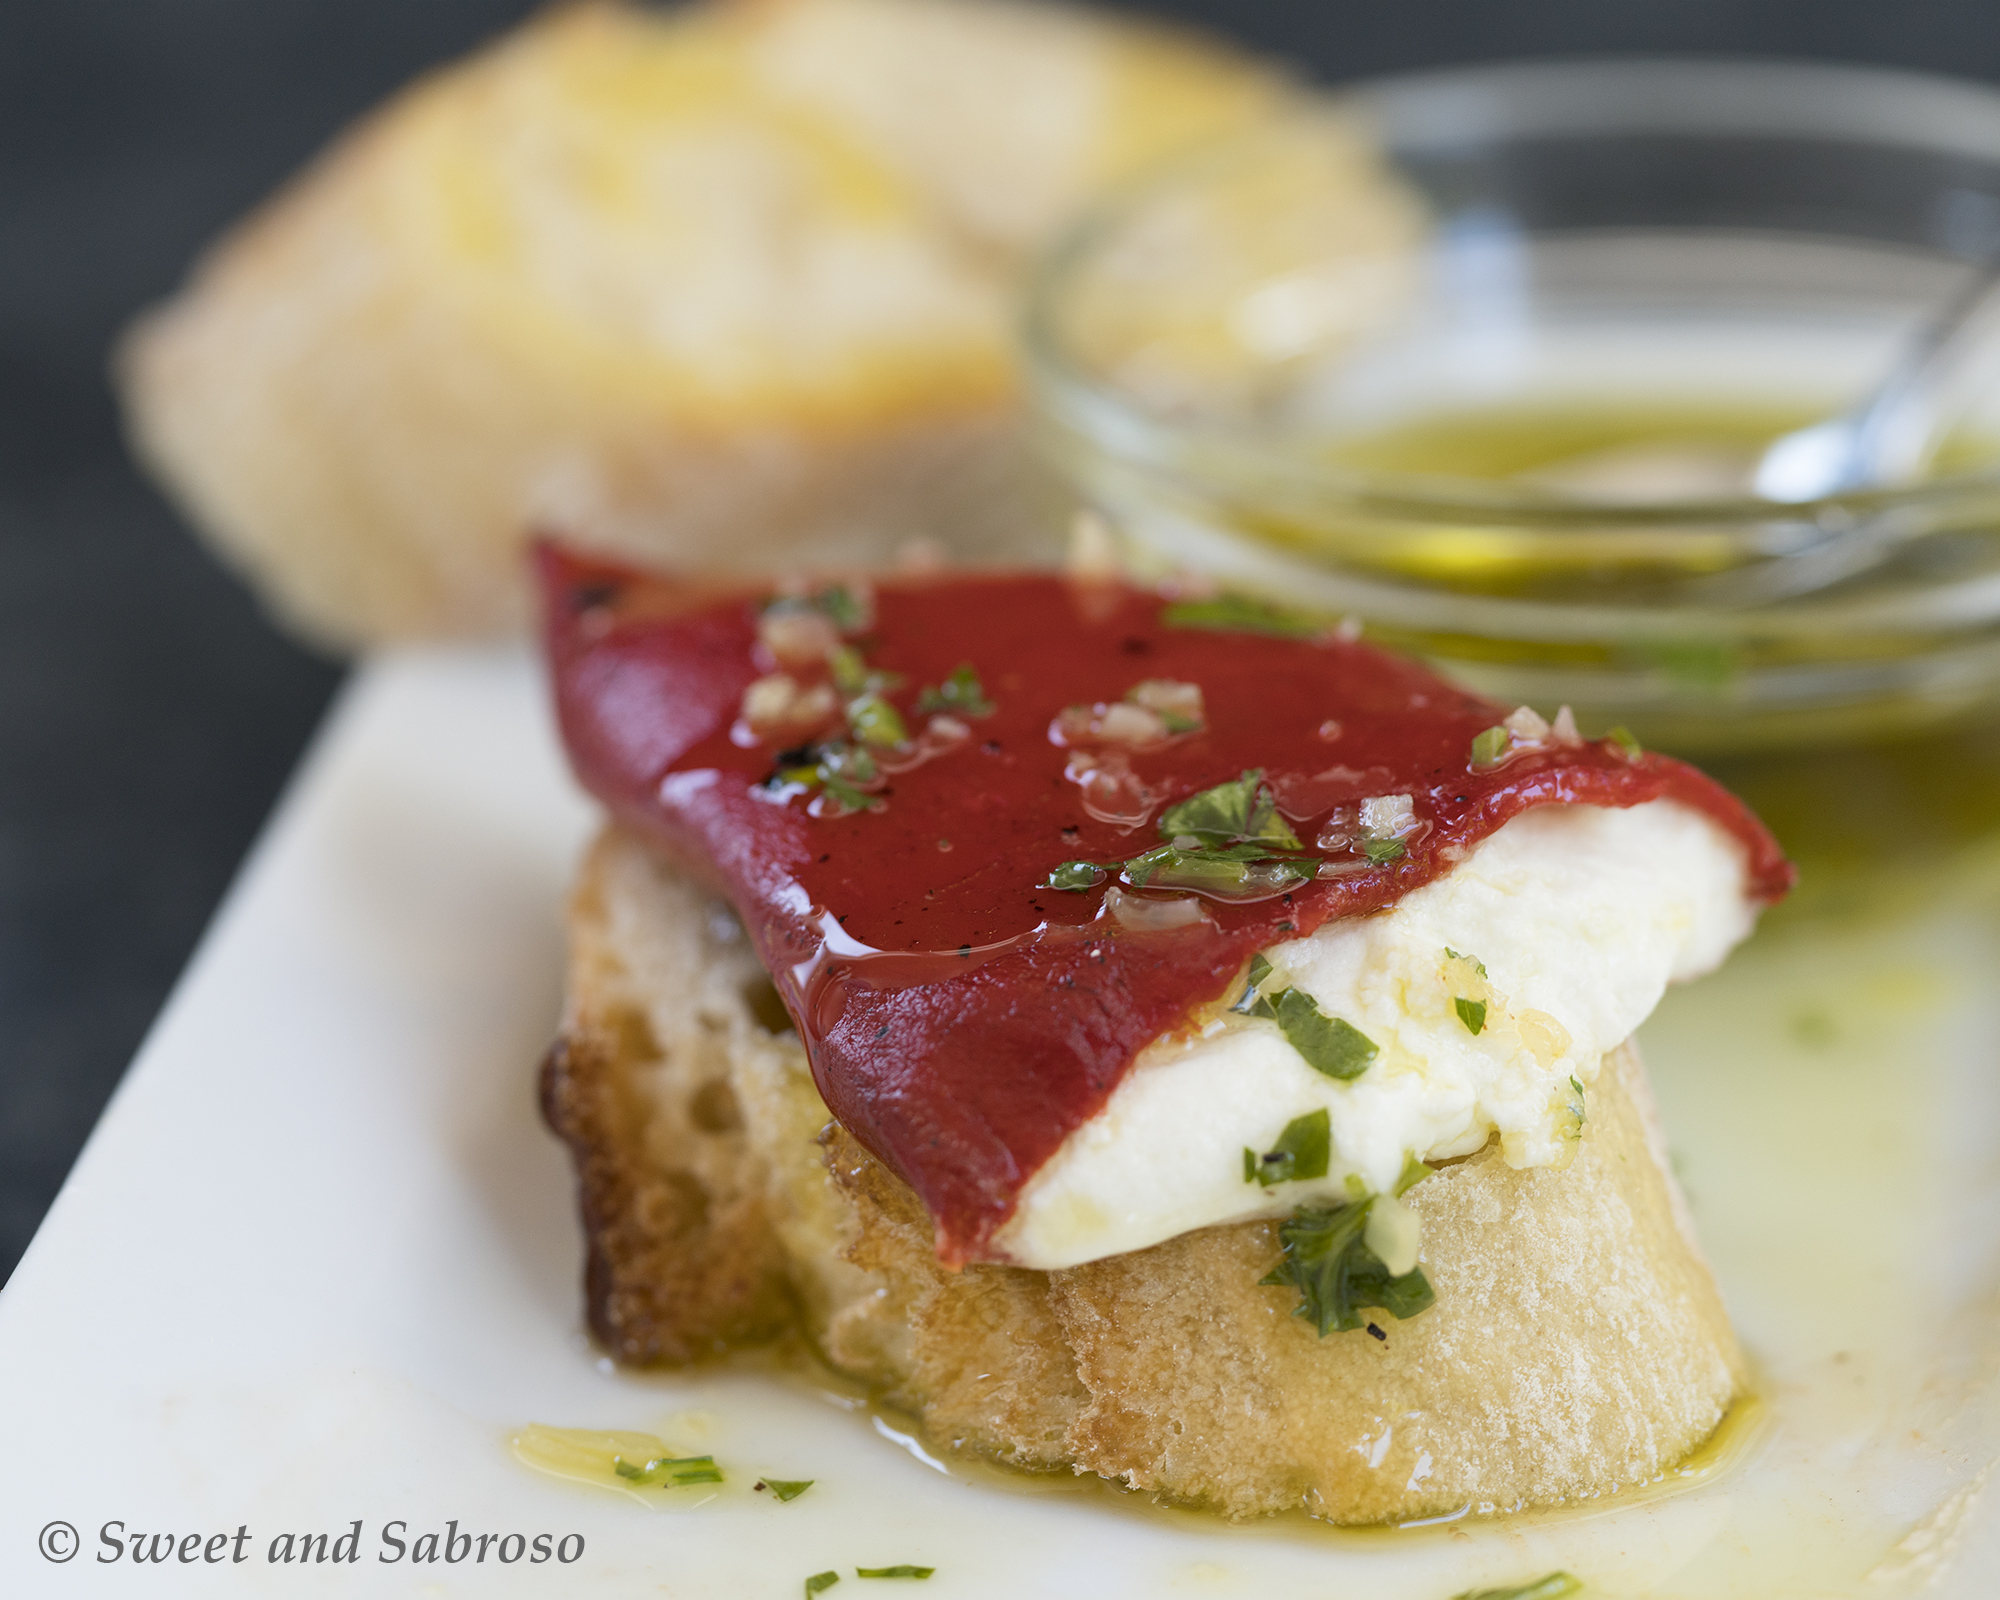 Goat Cheese Stuffed Piquillo Peppers (Pimientos de Piquillo) with Garlic Parsley Oil and Crusty Bread